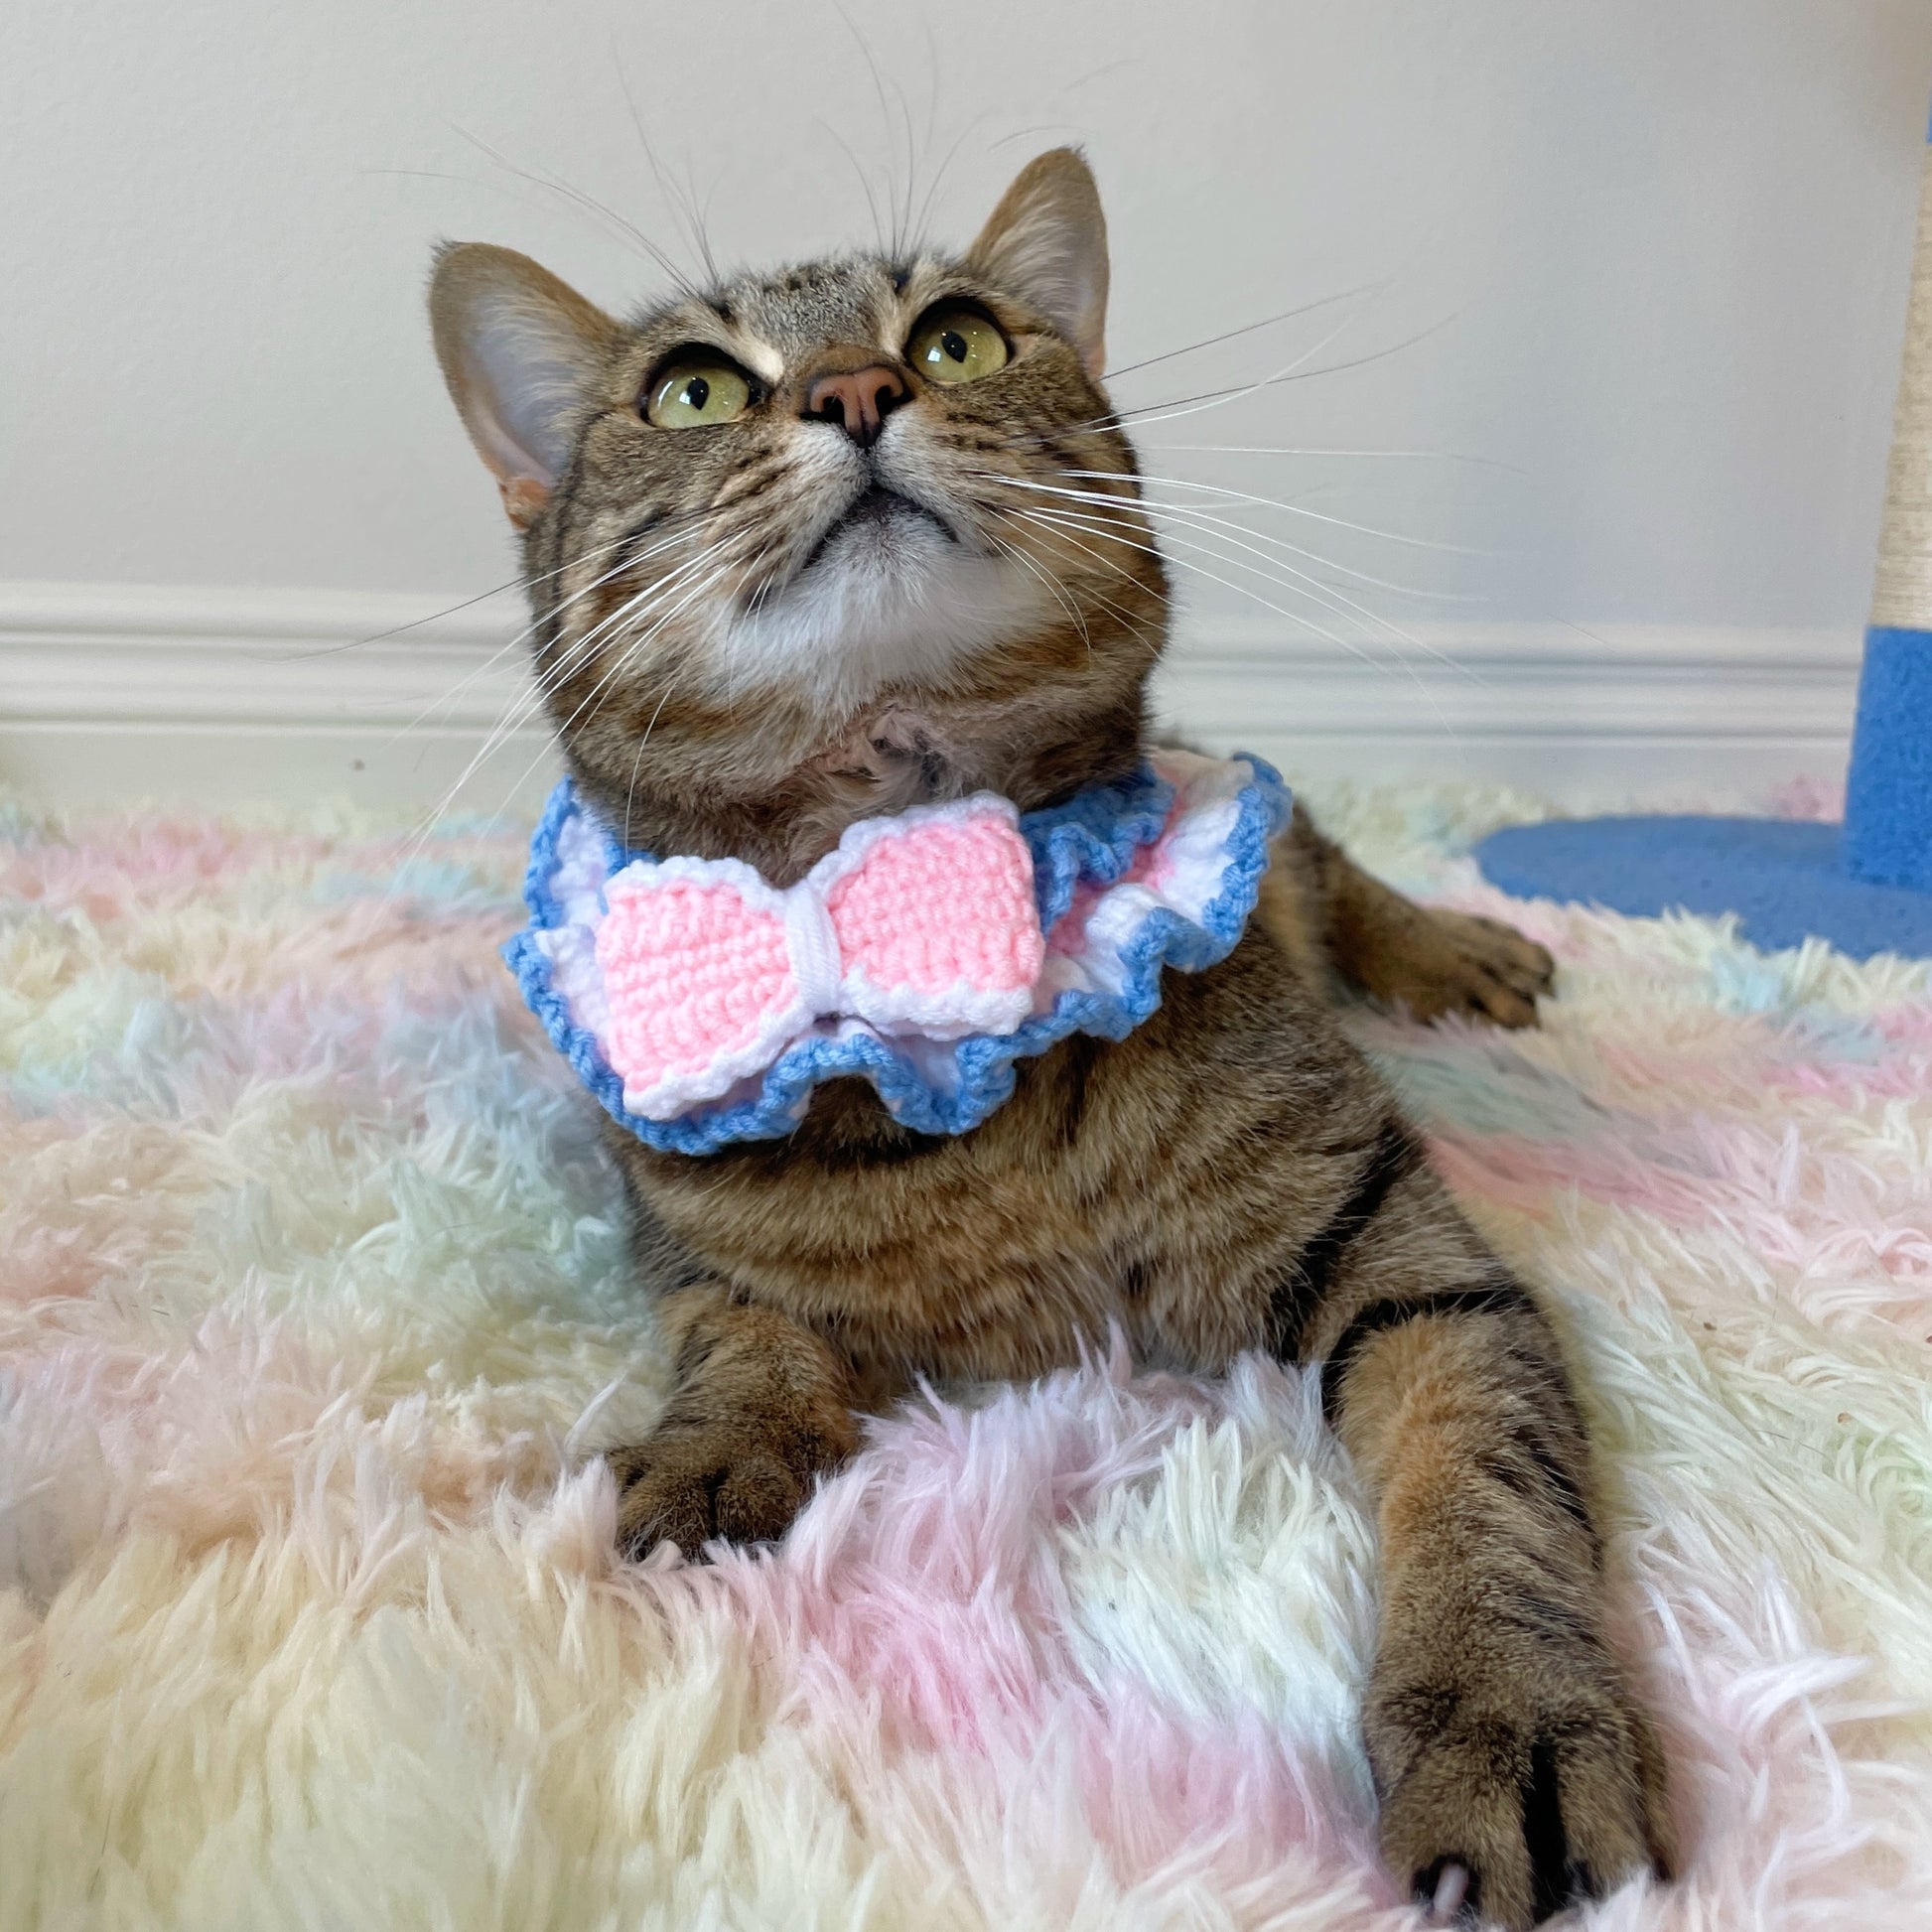 Pink Bow Tie Knit Handmade Crochet Pet Bib Accessory Collar for Cats and Dogs - Lil Wild Pets